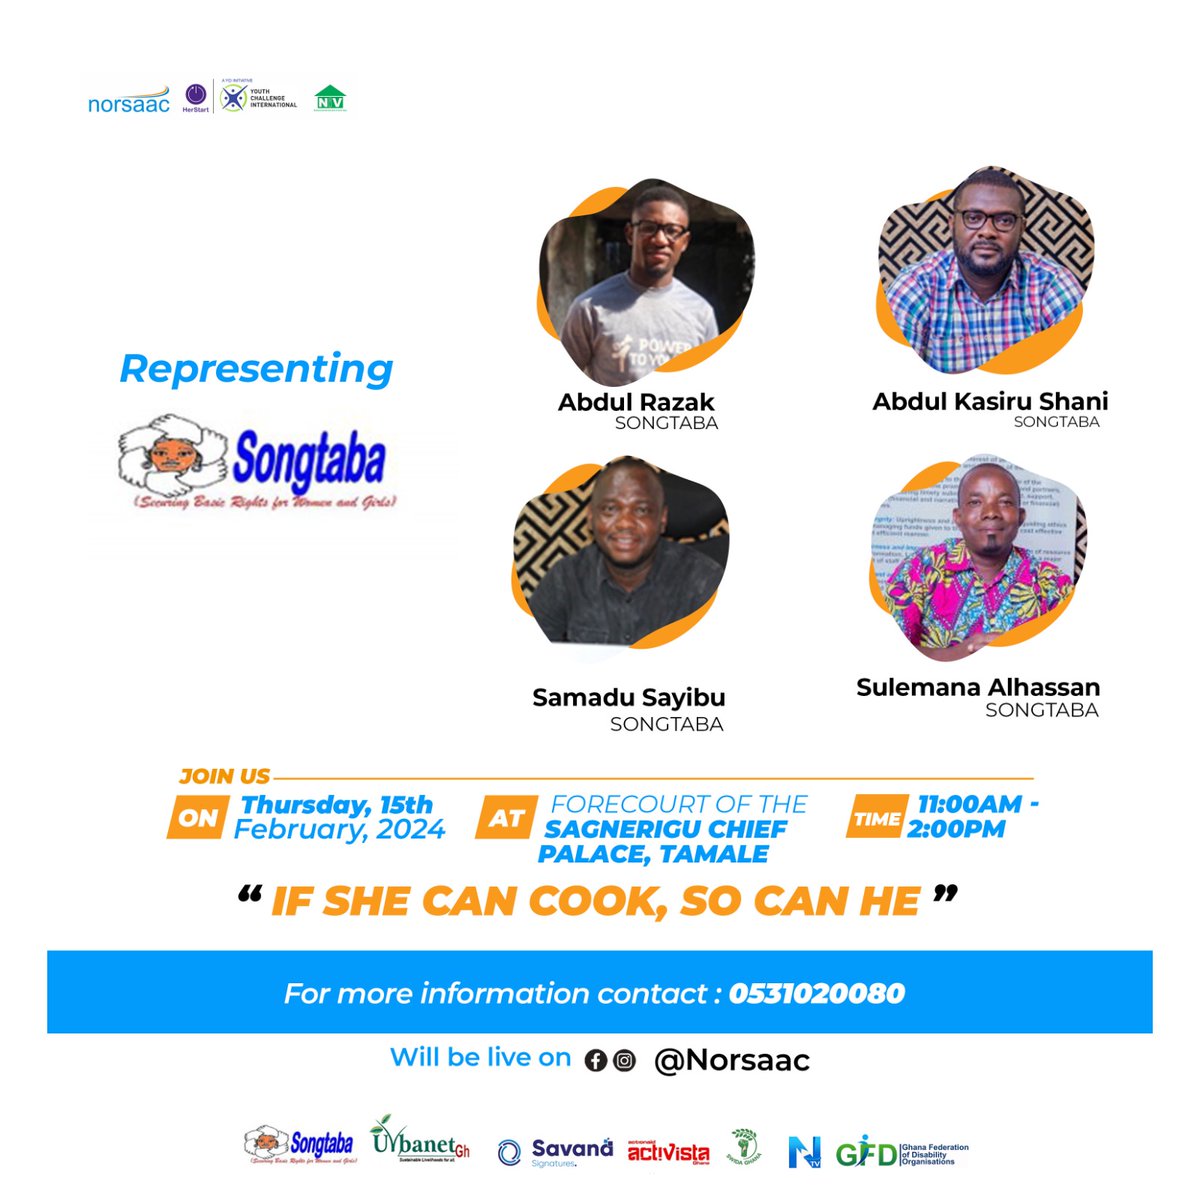 IF SHE CAN COOK, SO CAN HE 2nd Edition of cook A-Thon competition organized by @norsaac as part of promoting Positive Masculinity. Come witness @SongtabaNGO men in action at the Sagnarigu Chief Palace on Thursday 15th February, 2024